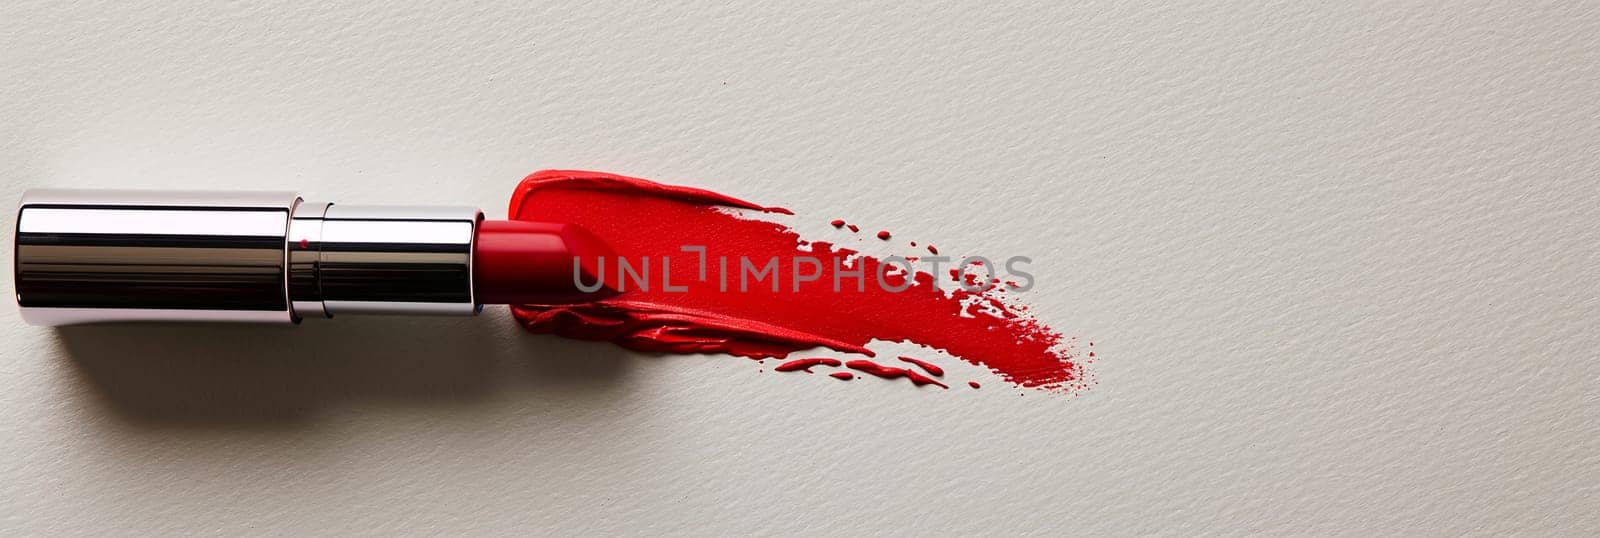 A close up of a red lipstick drawing a swatch on a white surface, leaving behind a smear of classic red matte lipstick.